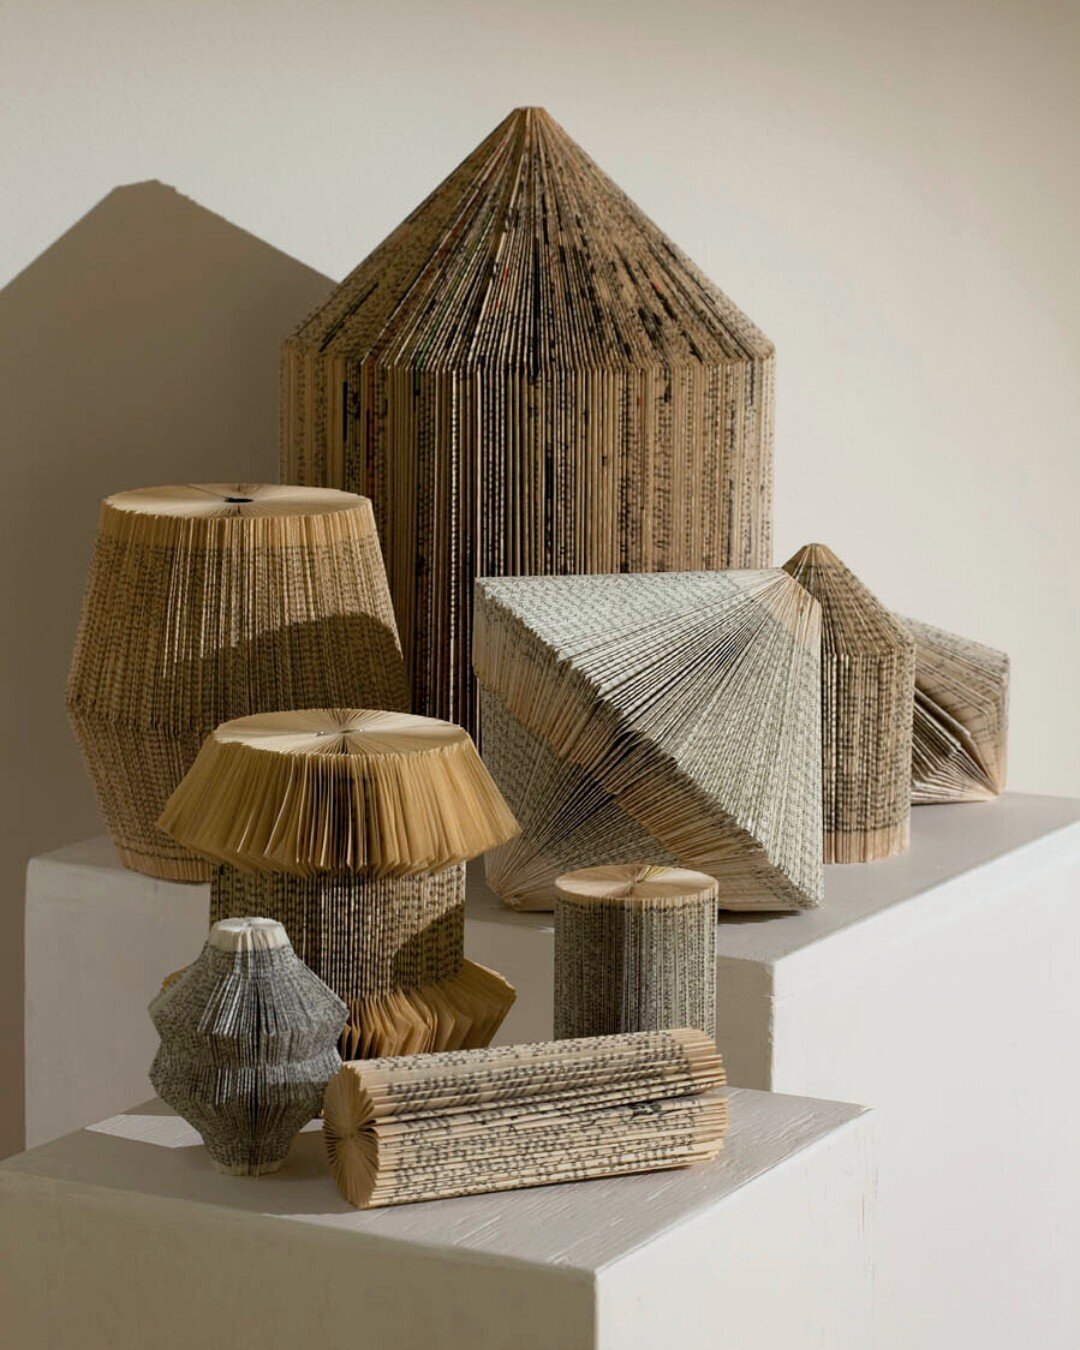 Book Gems are crafted from individual books, each folded into a distinct shape. We often display a collection of these architectural forms on bookshelves to reinterpret what once was there.⁠
⠀⠀⠀⠀⠀⠀⠀⠀⠀⁠
Take a deep dive into more of Karen's work via t